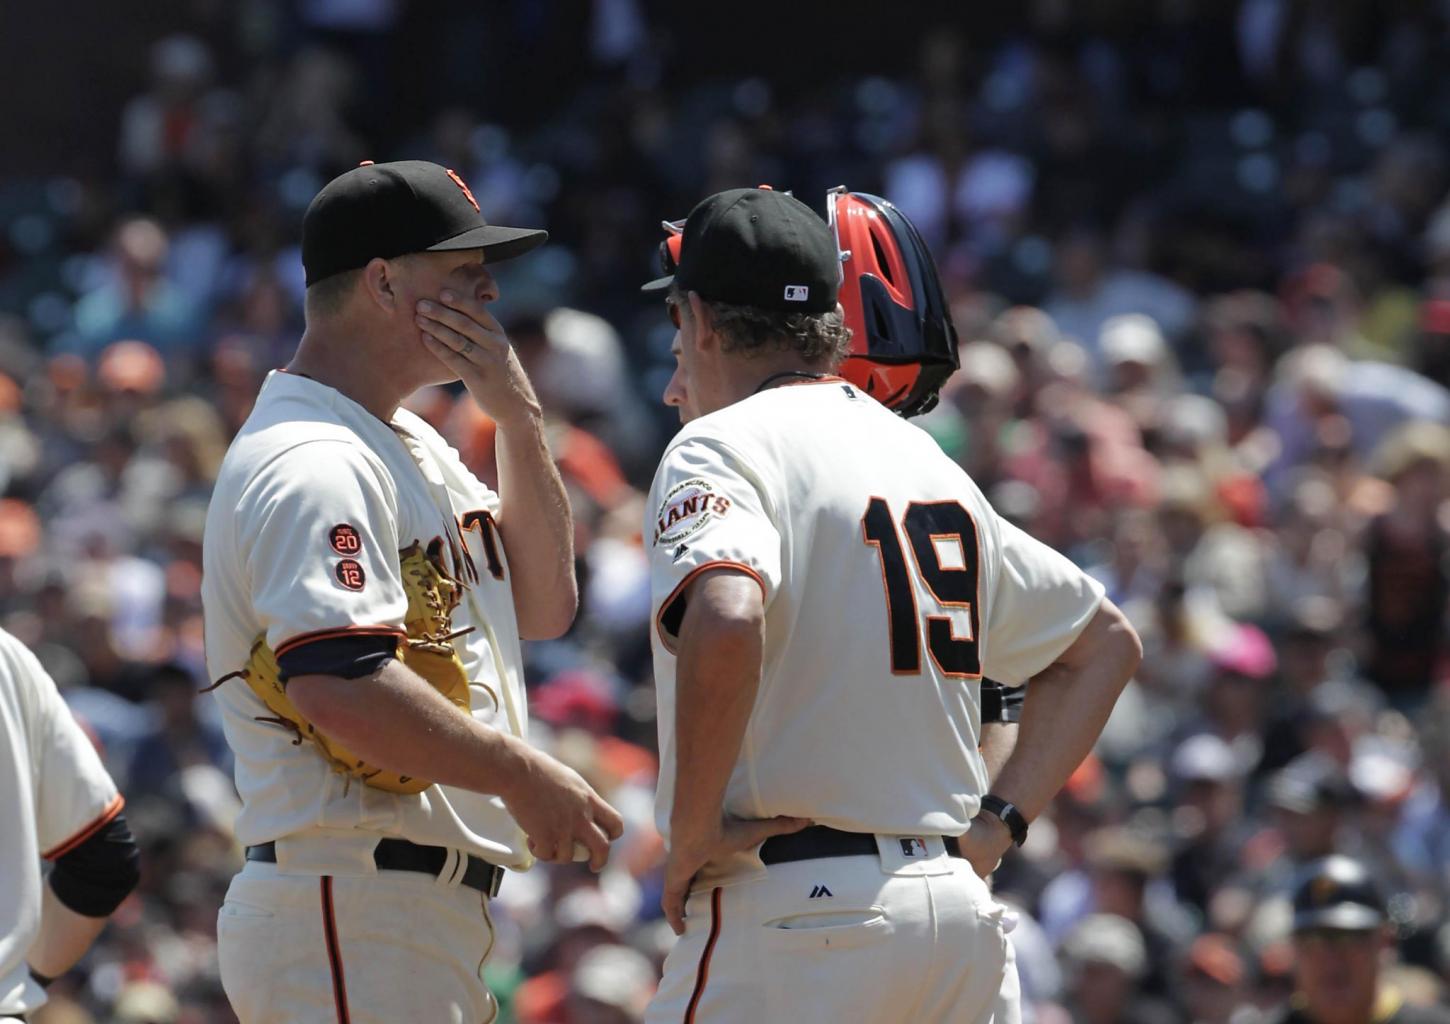 Giants place Cain on DL with back injury, plus Bumgarner’s Cy Young hopes, lineup